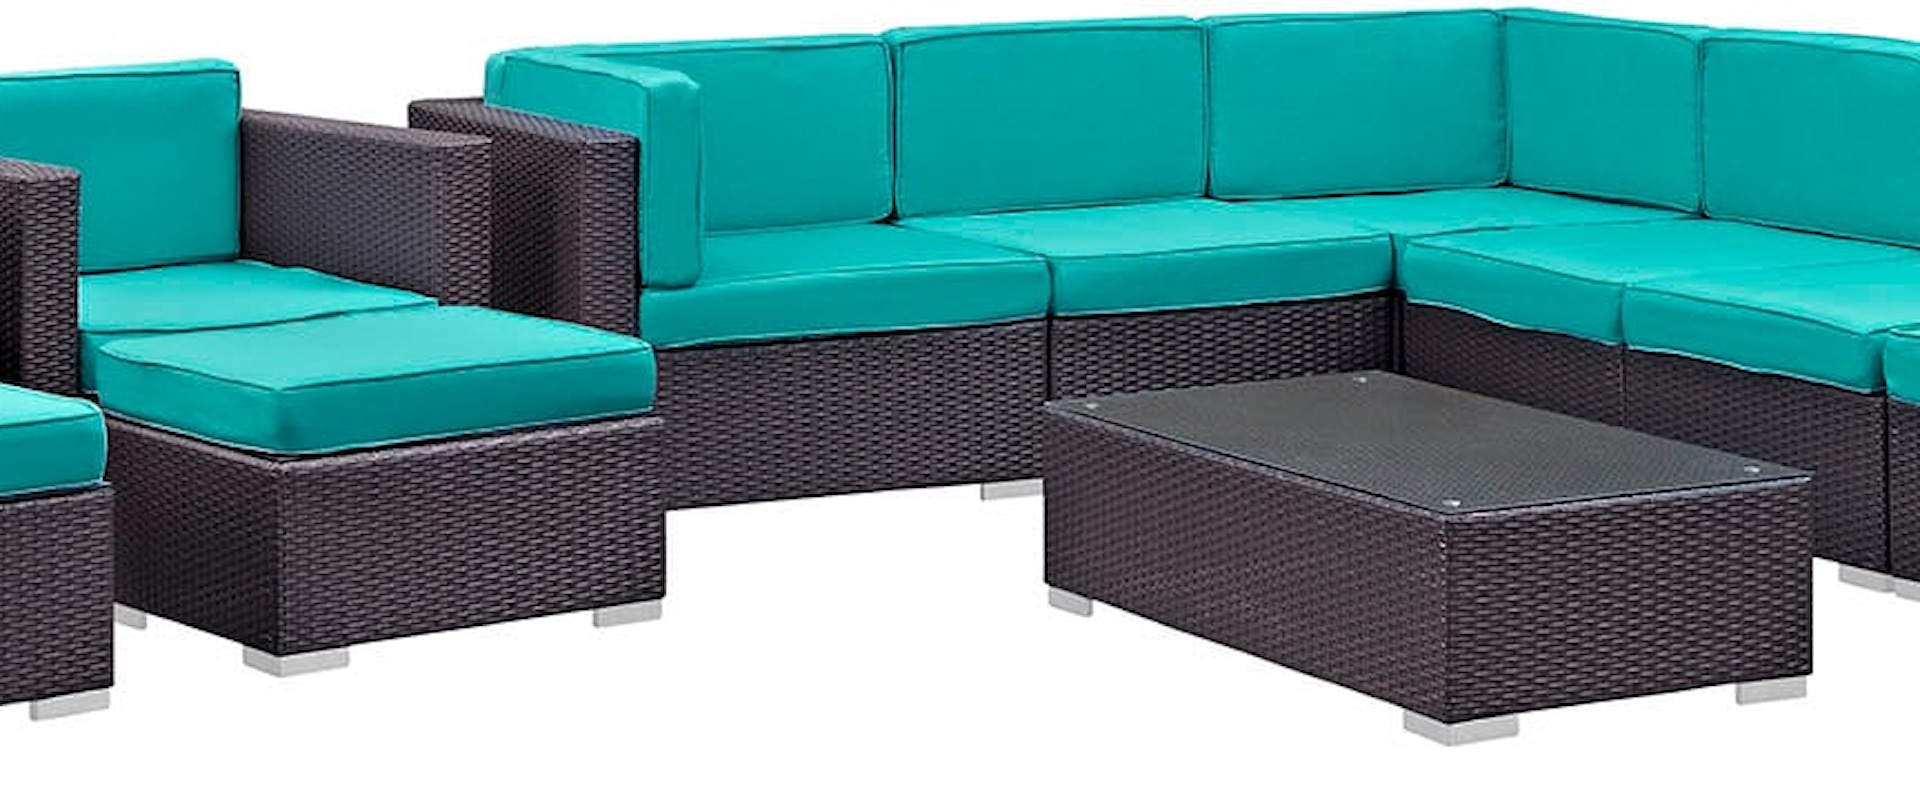 Contemporary Avia 10-Piece Outdoor Patio Sectional Set - Turquoise